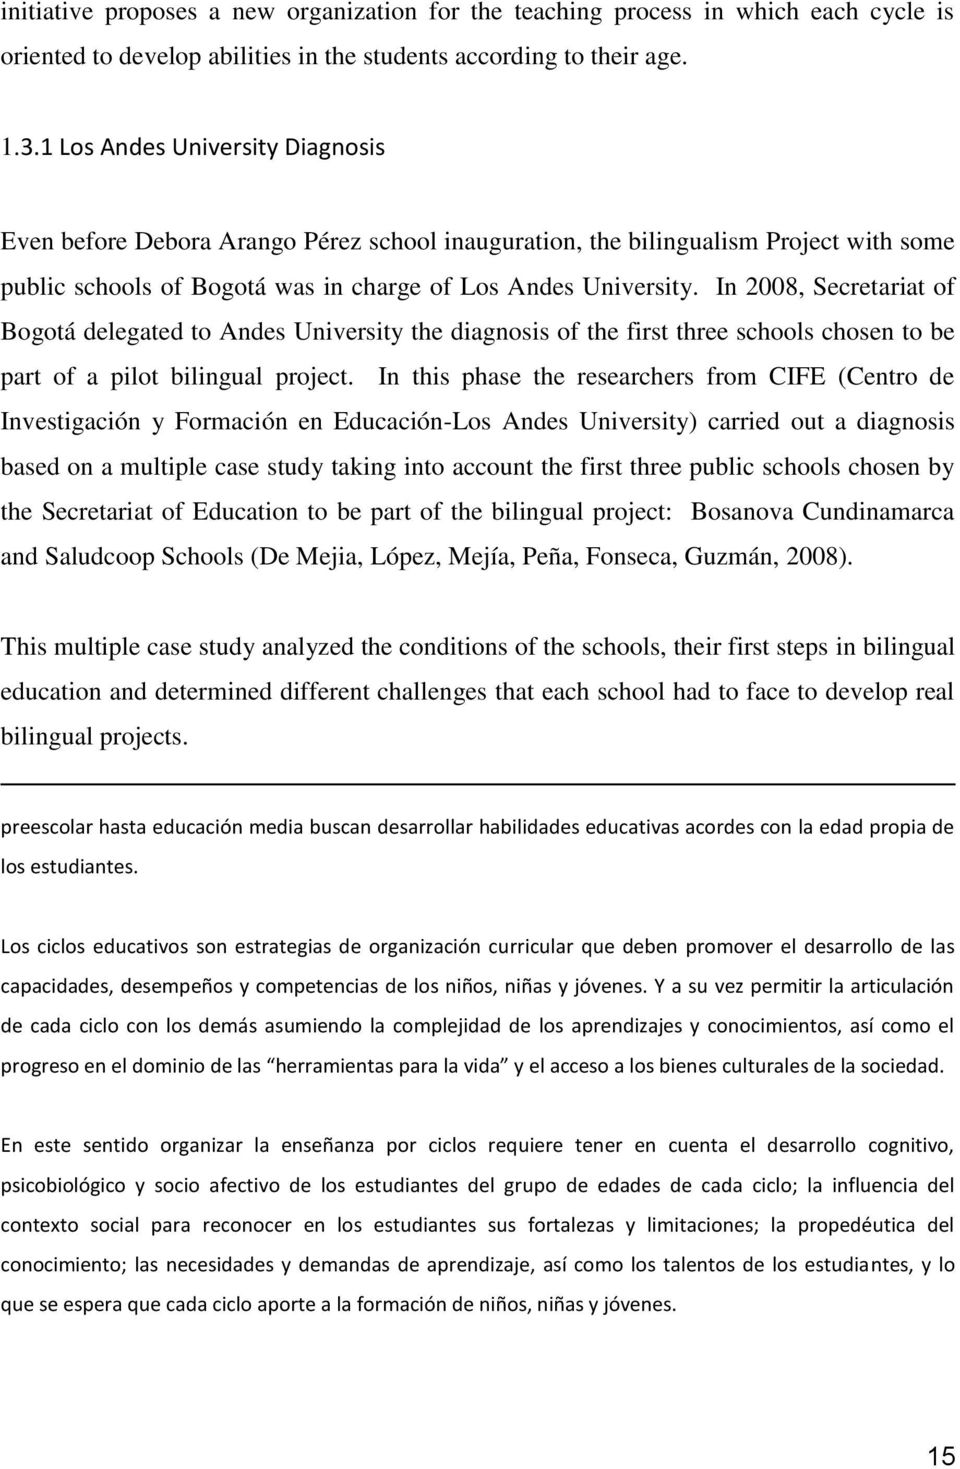 In 2008, Secretariat of Bogotá delegated to Andes University the diagnosis of the first three schools chosen to be part of a pilot bilingual project.